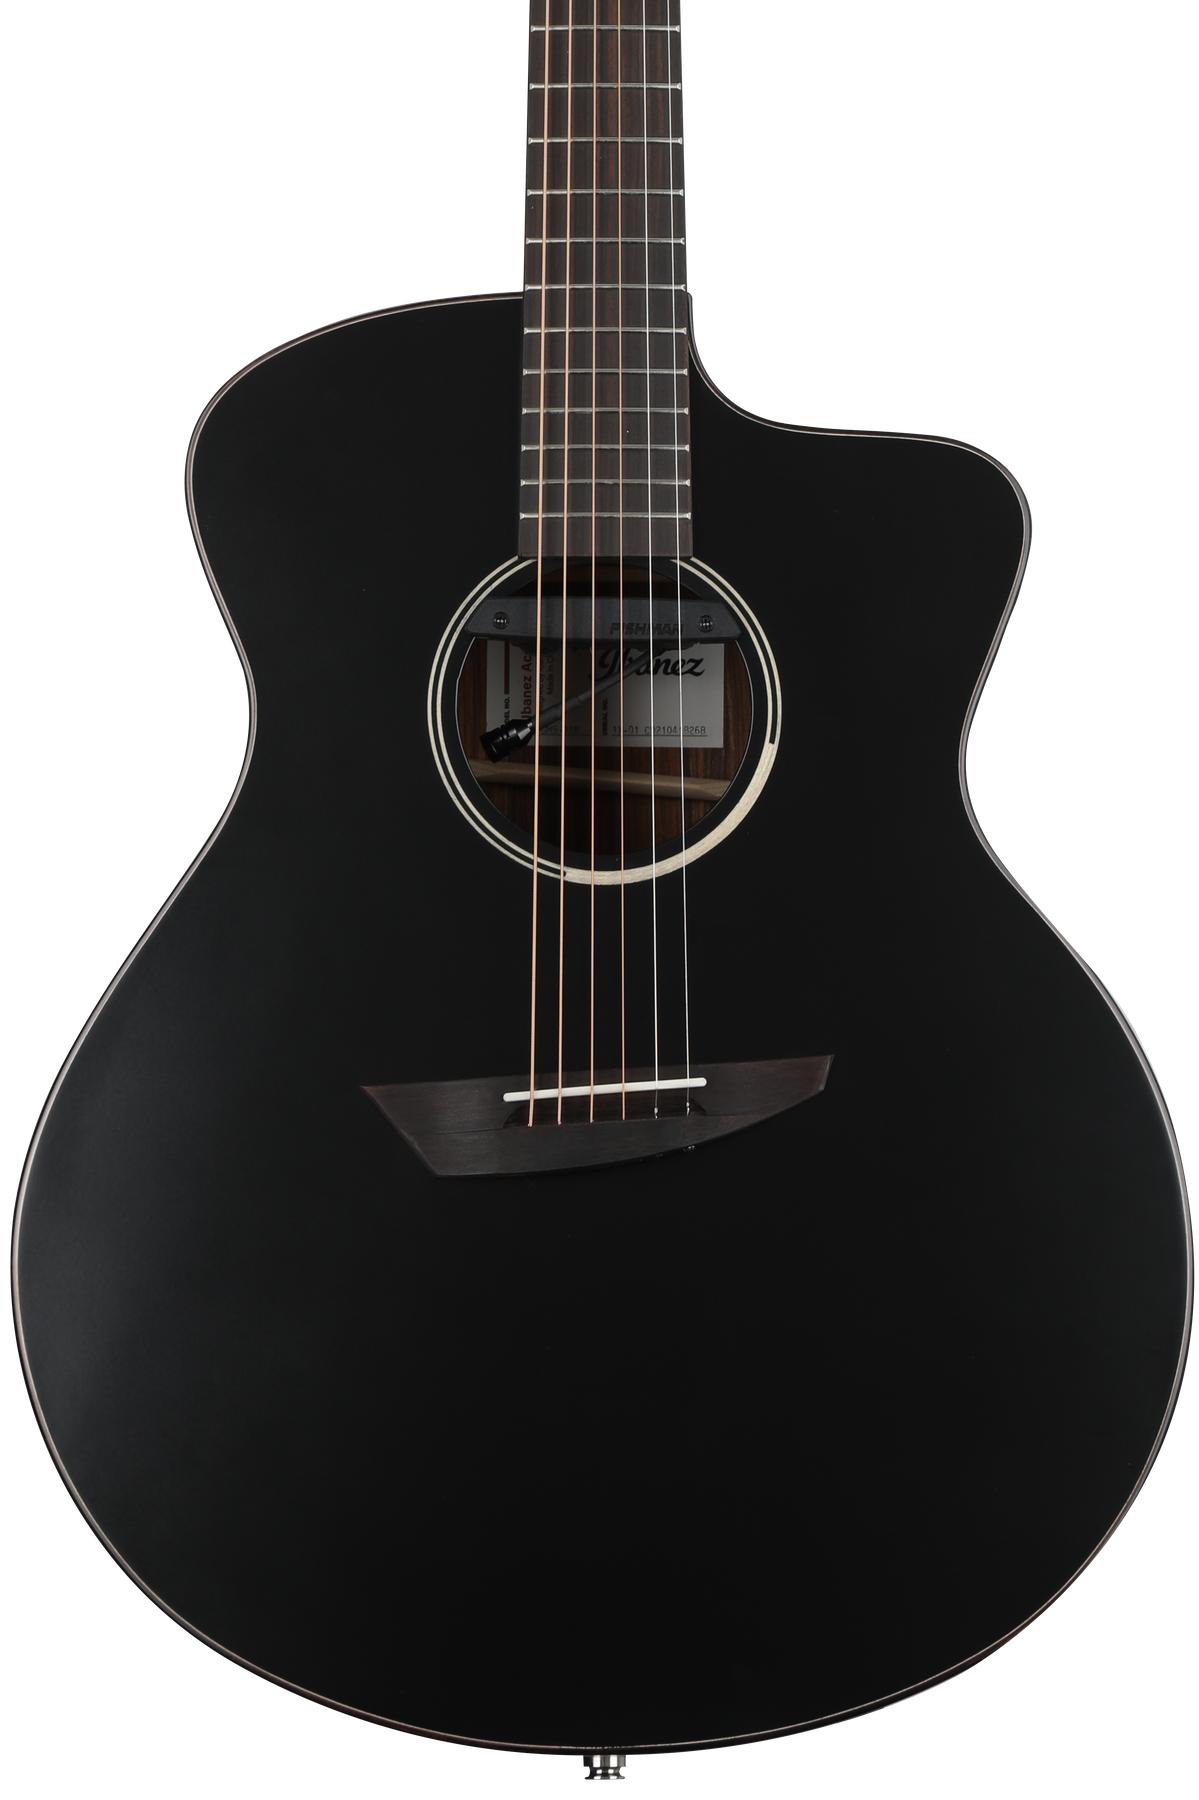 Back　JGM5　Signature　Guitar　Jon　Ibanez　Natural　Sides　Gomm　High　Gloss　Acoustic-Electric　and　Black　Satin　Top,　Sweetwater